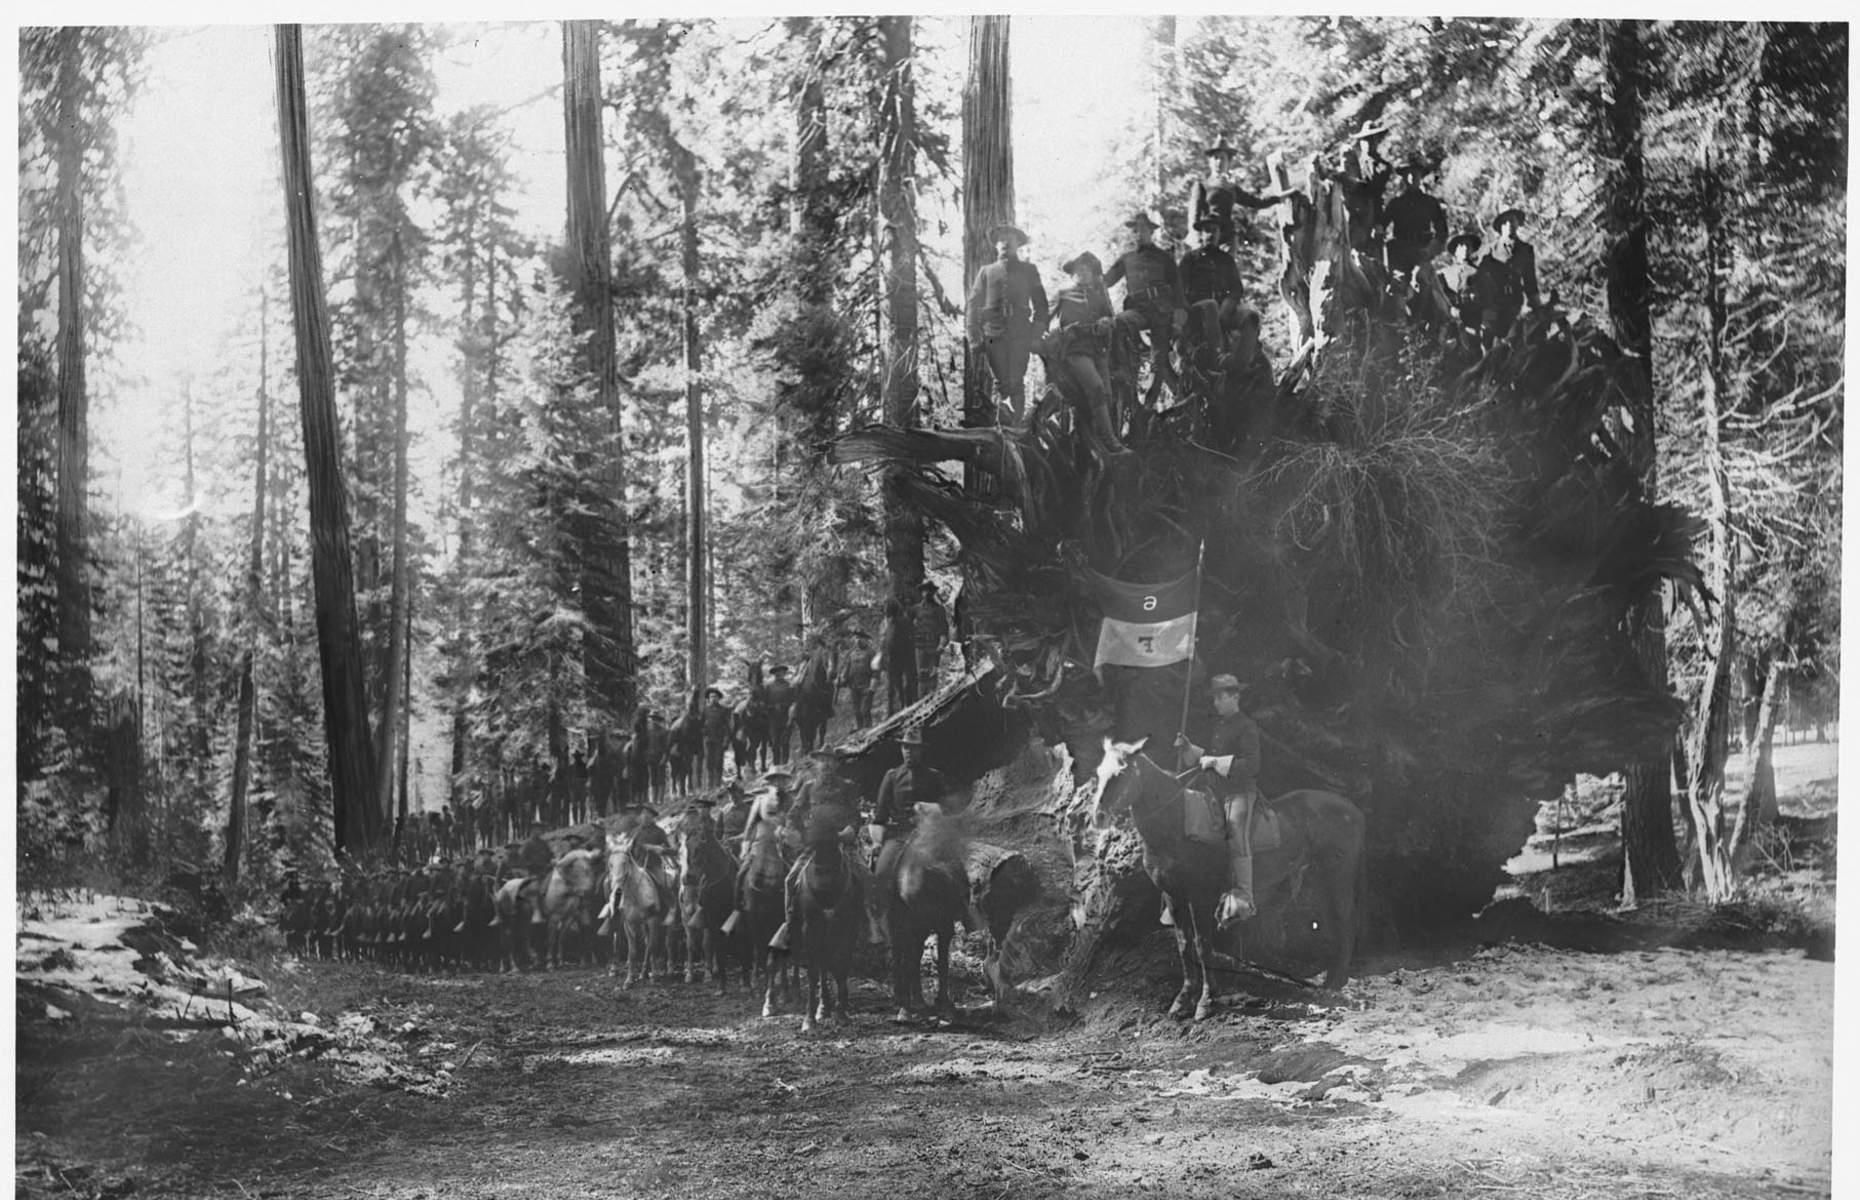 <p>This famous image from 1899 shows around 40 members from Troop F of the US 6th Cavalry posing with their trusted steeds in Yosemite National Park. The tree they surround is the Fallen Monarch, believed to have been toppled some 300 years ago; it still lies in Mariposa Grove today and can be seen along the Big Trees Loop trail. Federal troops such as these helped police trespassing, livestock grazing and clear-cutting in Yosemite between 1891 and 1913. In 1918, Clare Marie Hodges became the first female ranger to serve at the park.</p>